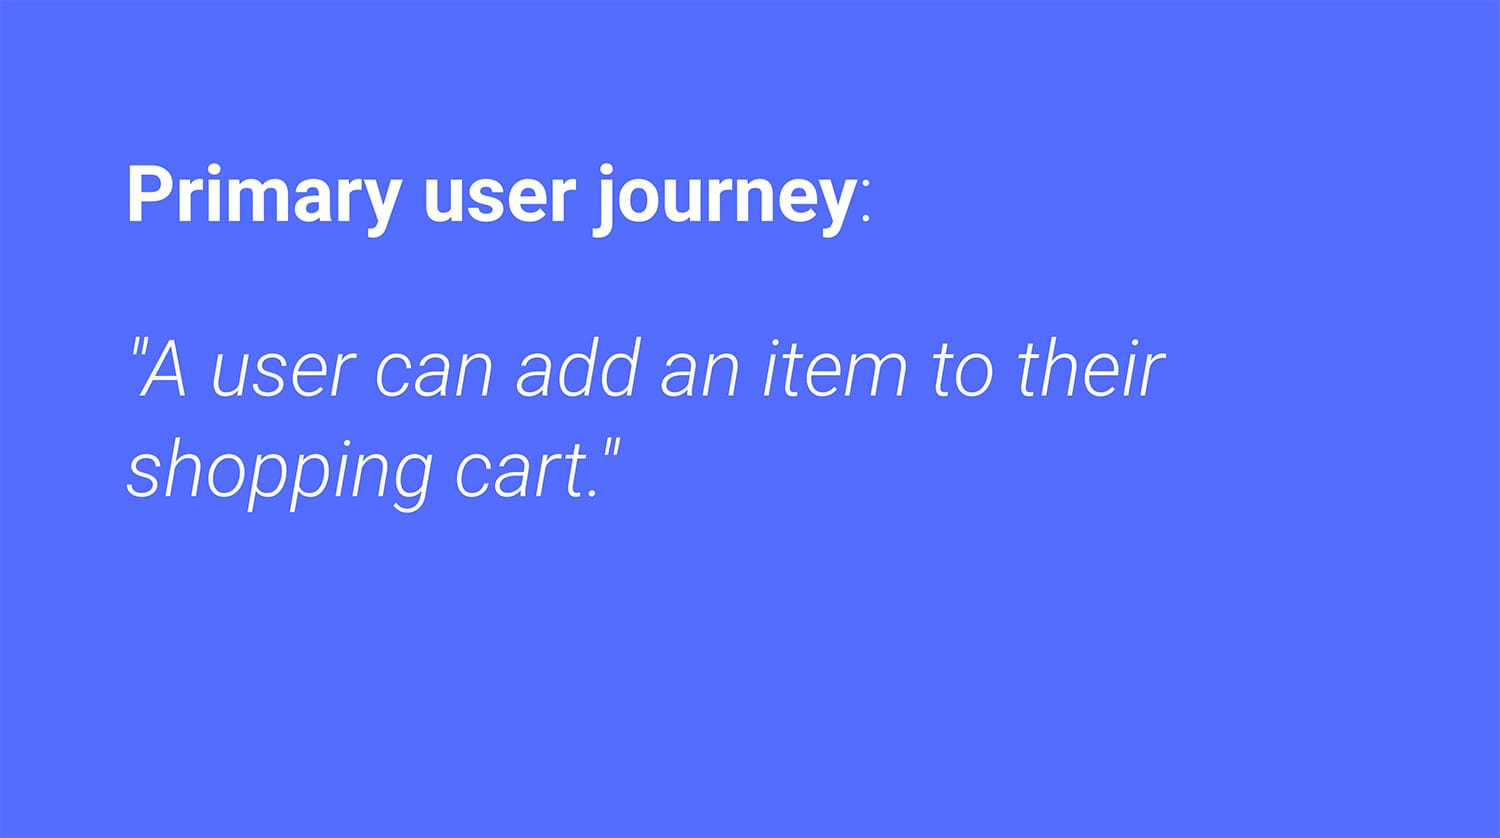 Primary user journey: A user can add an item to their shopping cart.